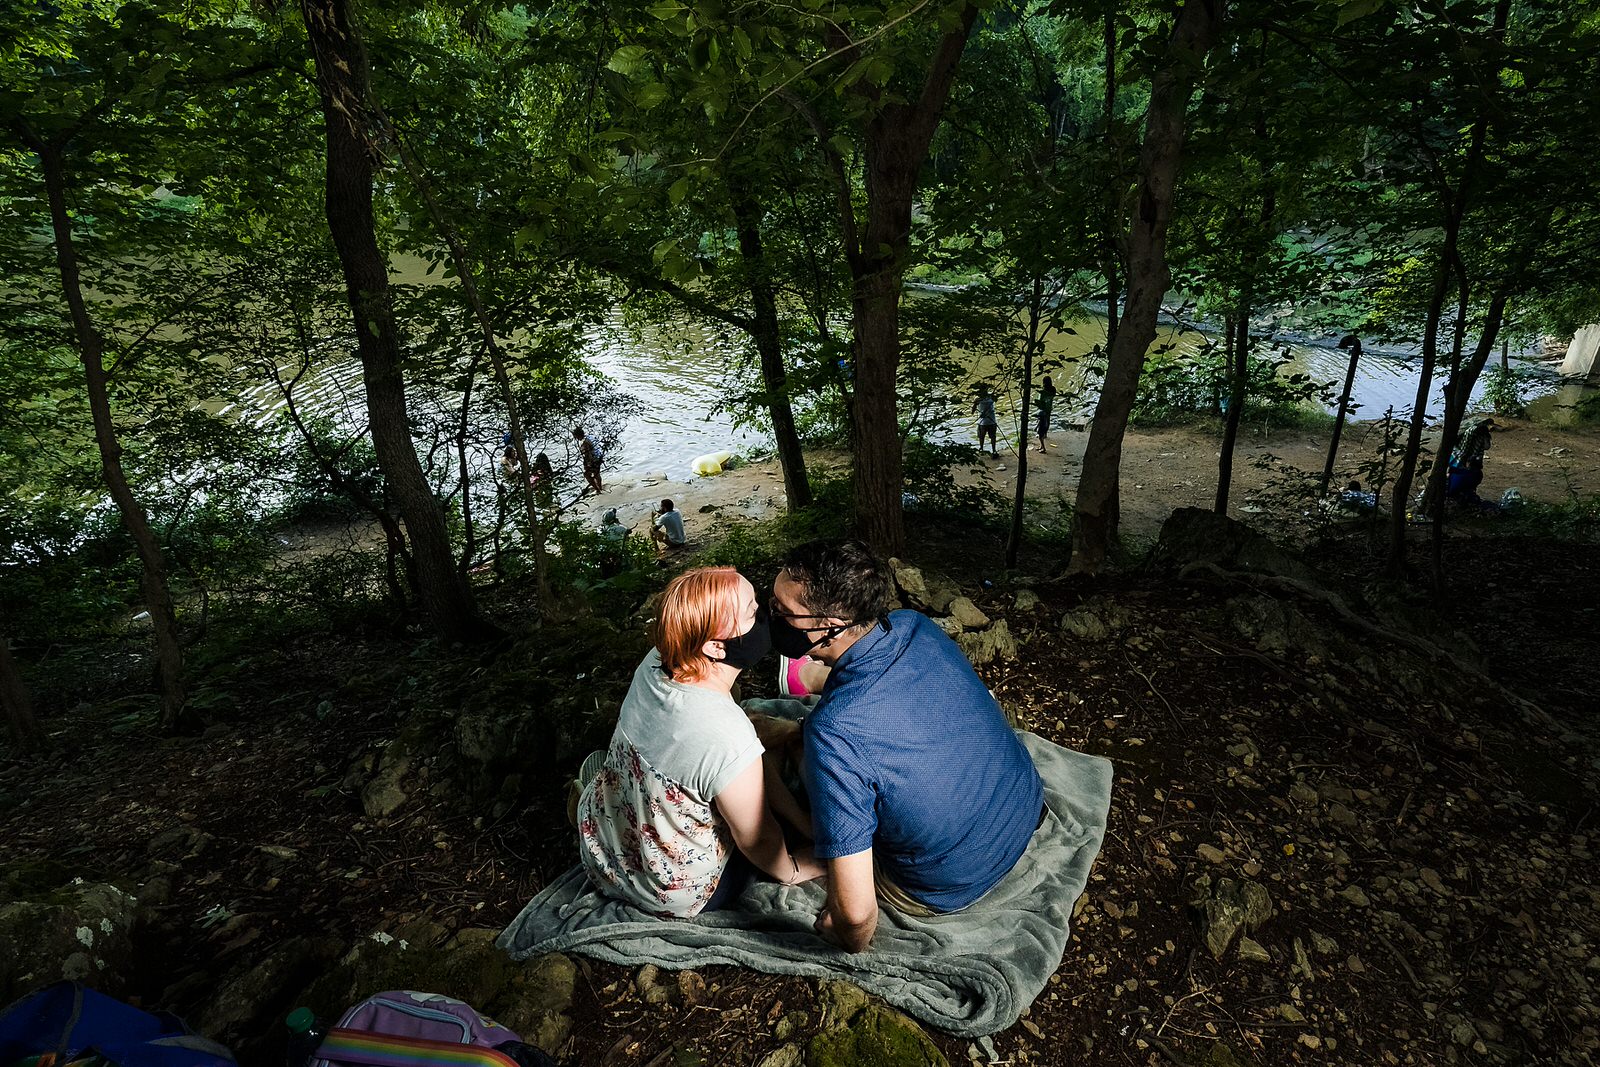 Engaged couple wearing masks due to Covid, kiss in front of the Eno River